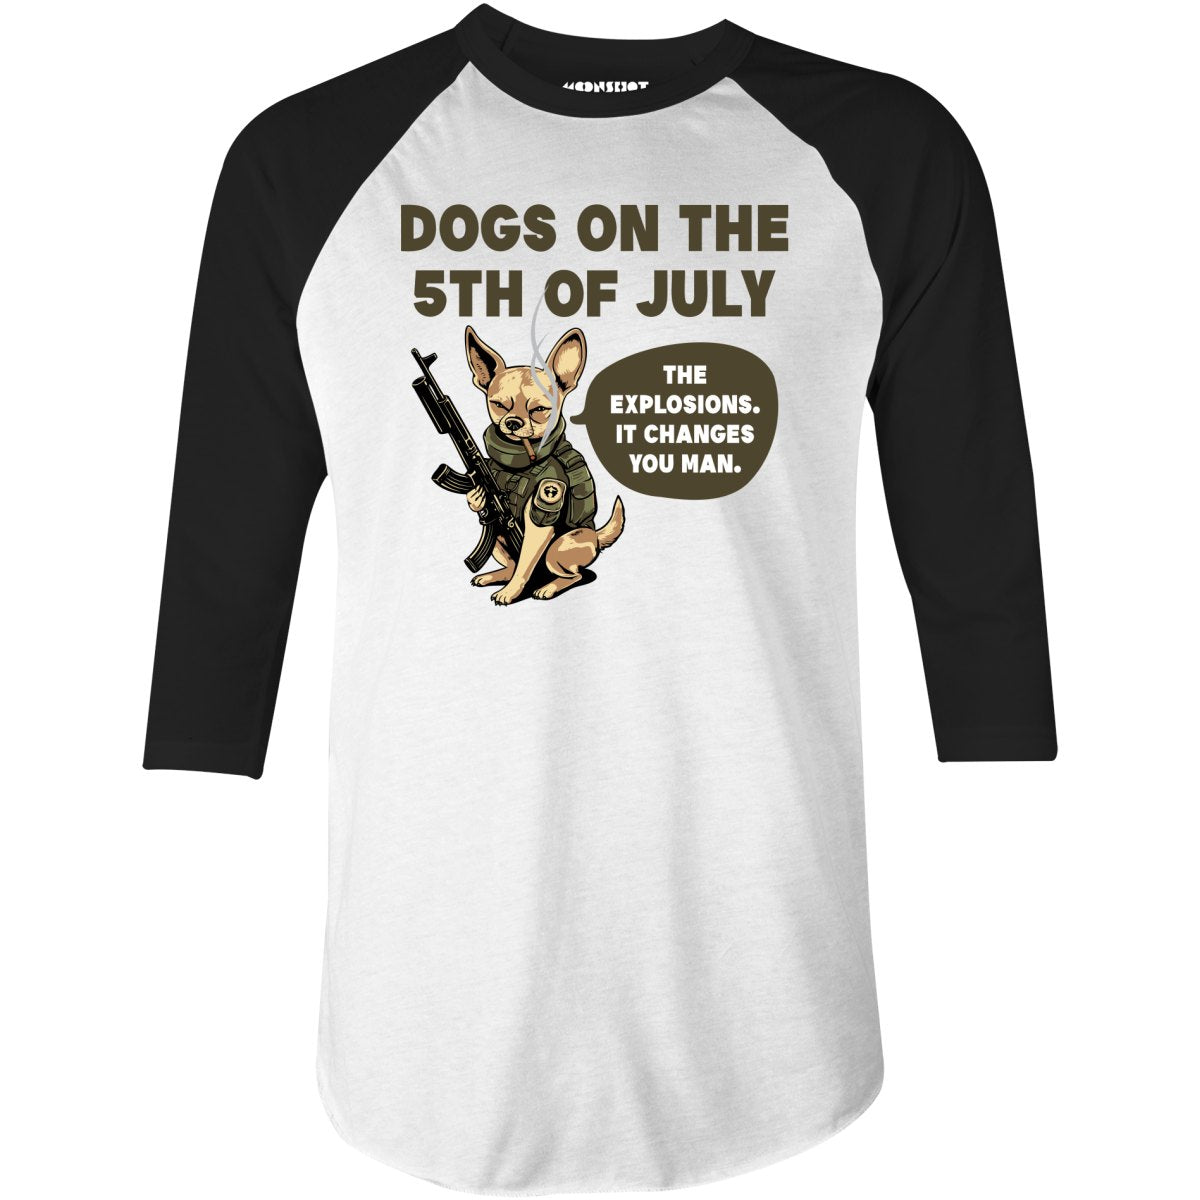 Dogs on the 5th of July - 3/4 Sleeve Raglan T-Shirt